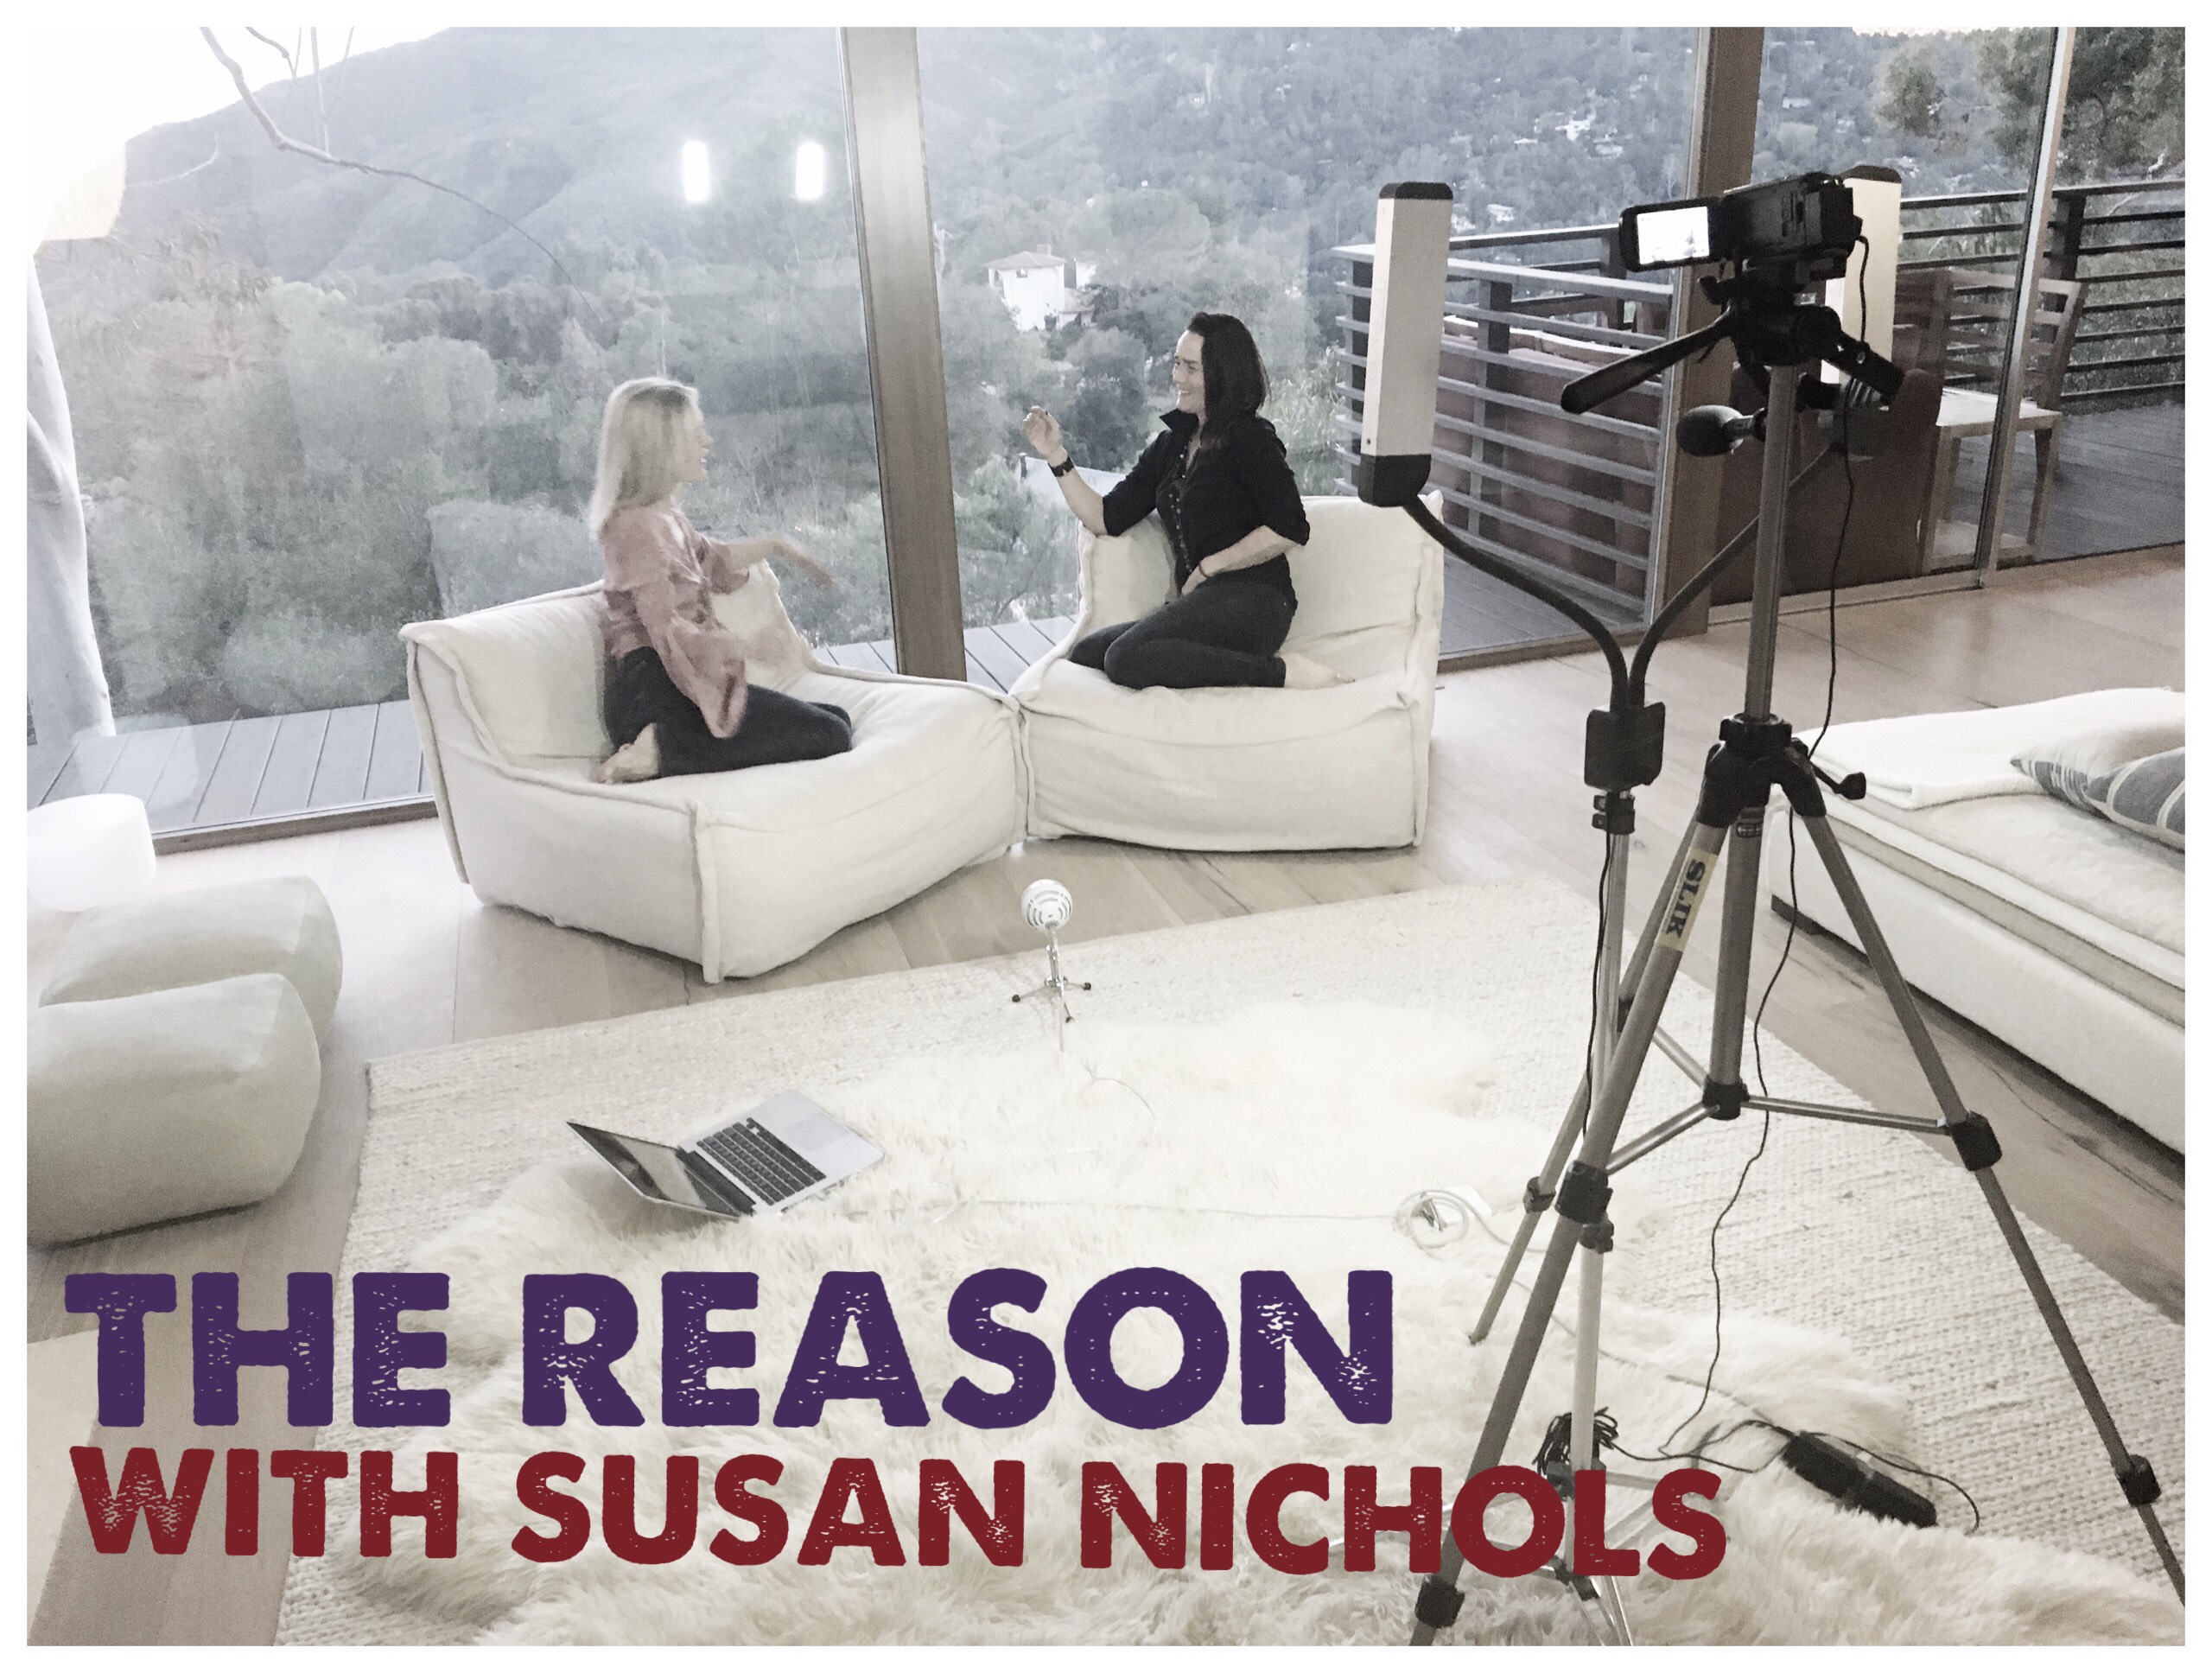 THE REASON Interview with Susan Nichols